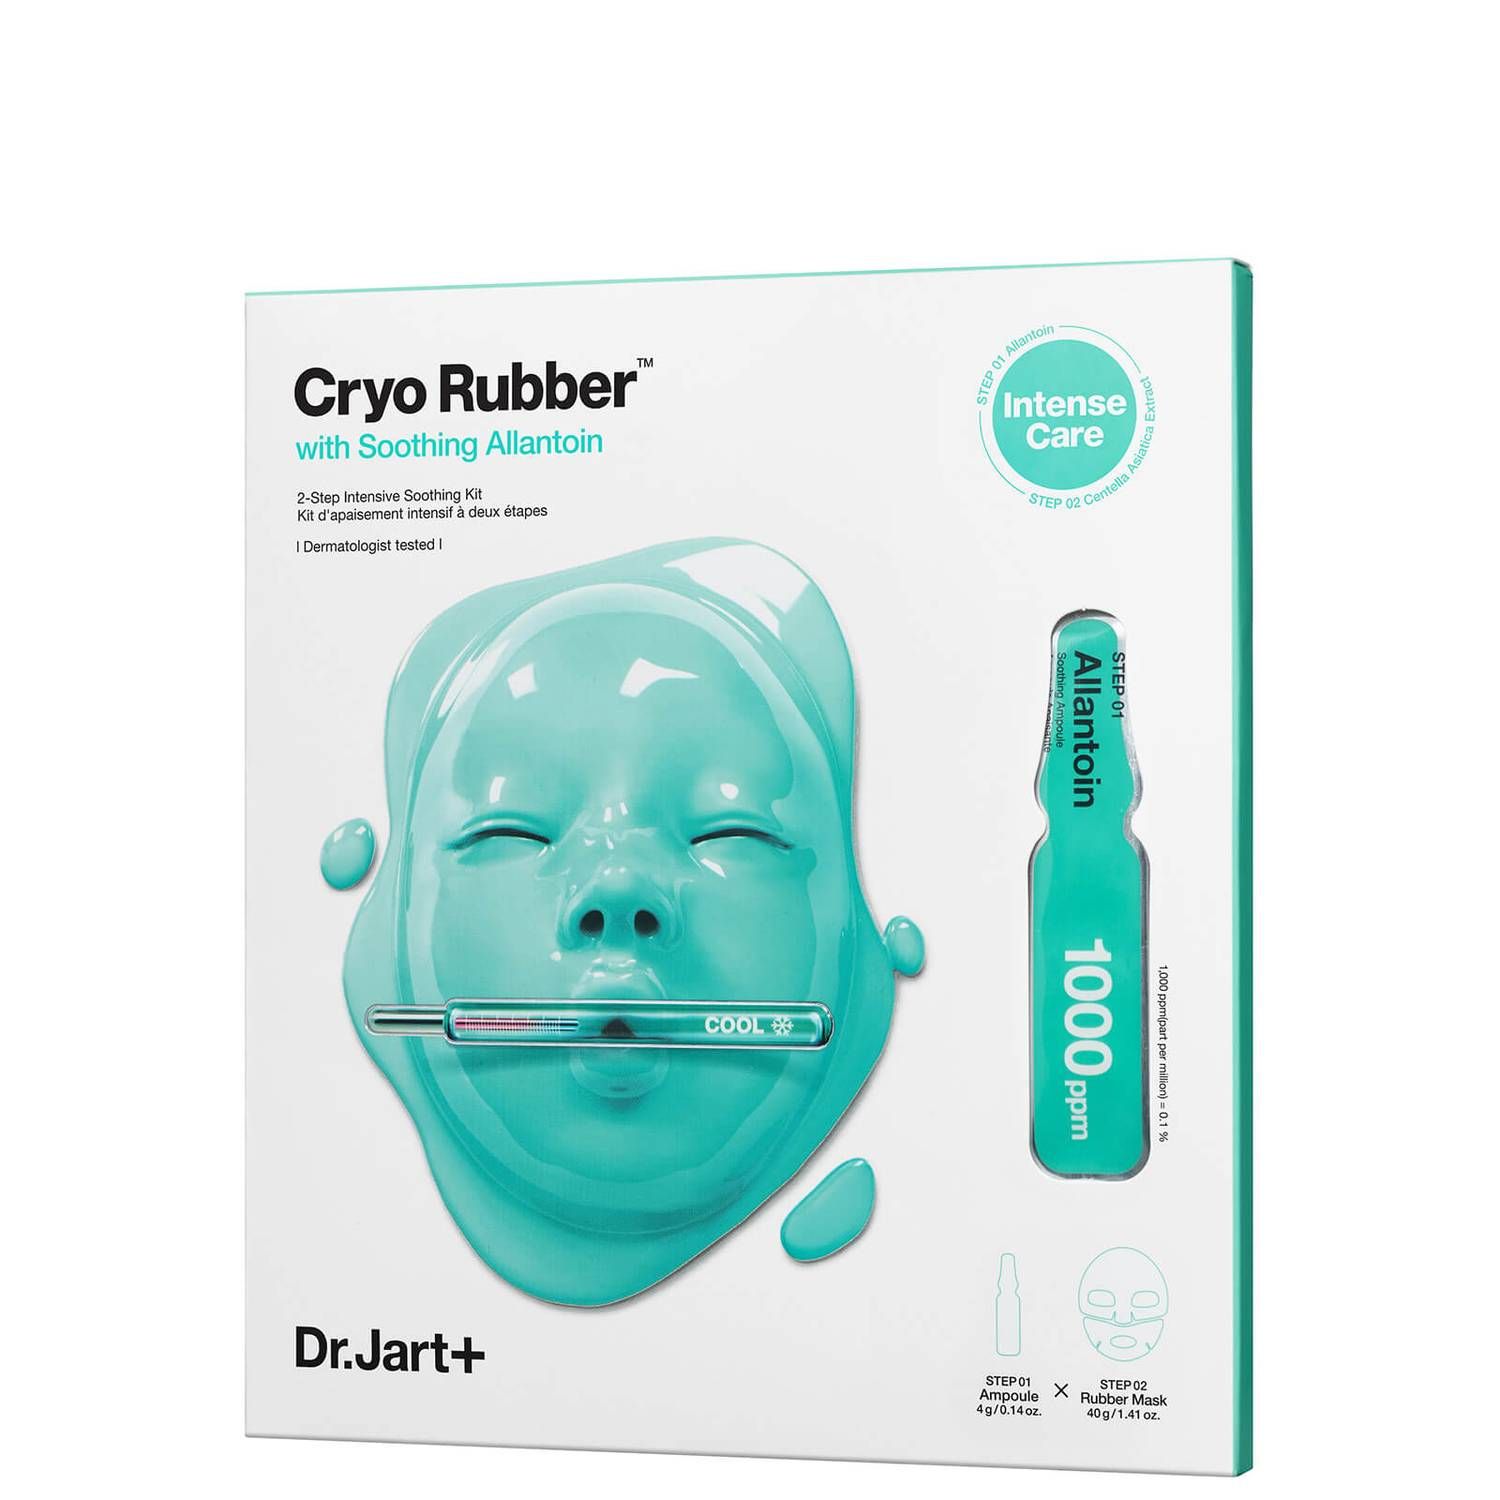 Dr.Jart+ Cryo Rubber Mask with Soothing Allantoin 44g | Look Fantastic (UK)